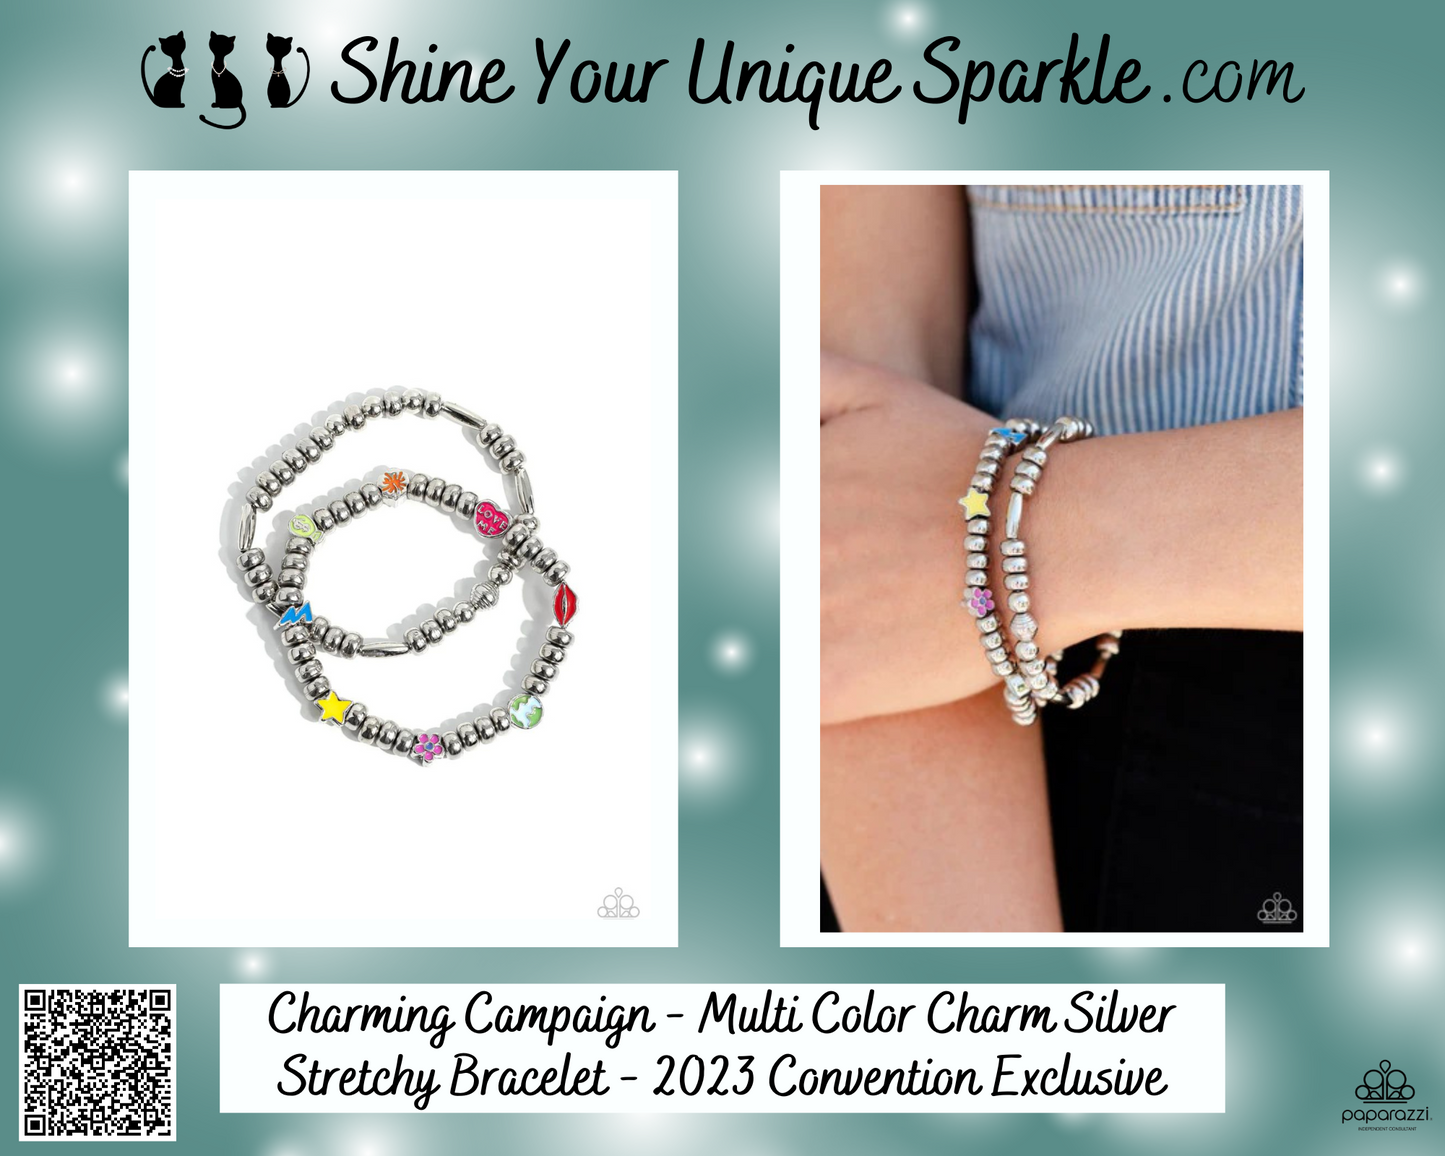 Charming Campaign - Multi Color Charm Silver Stretchy Bracelet - 2023 Convention Exclusive